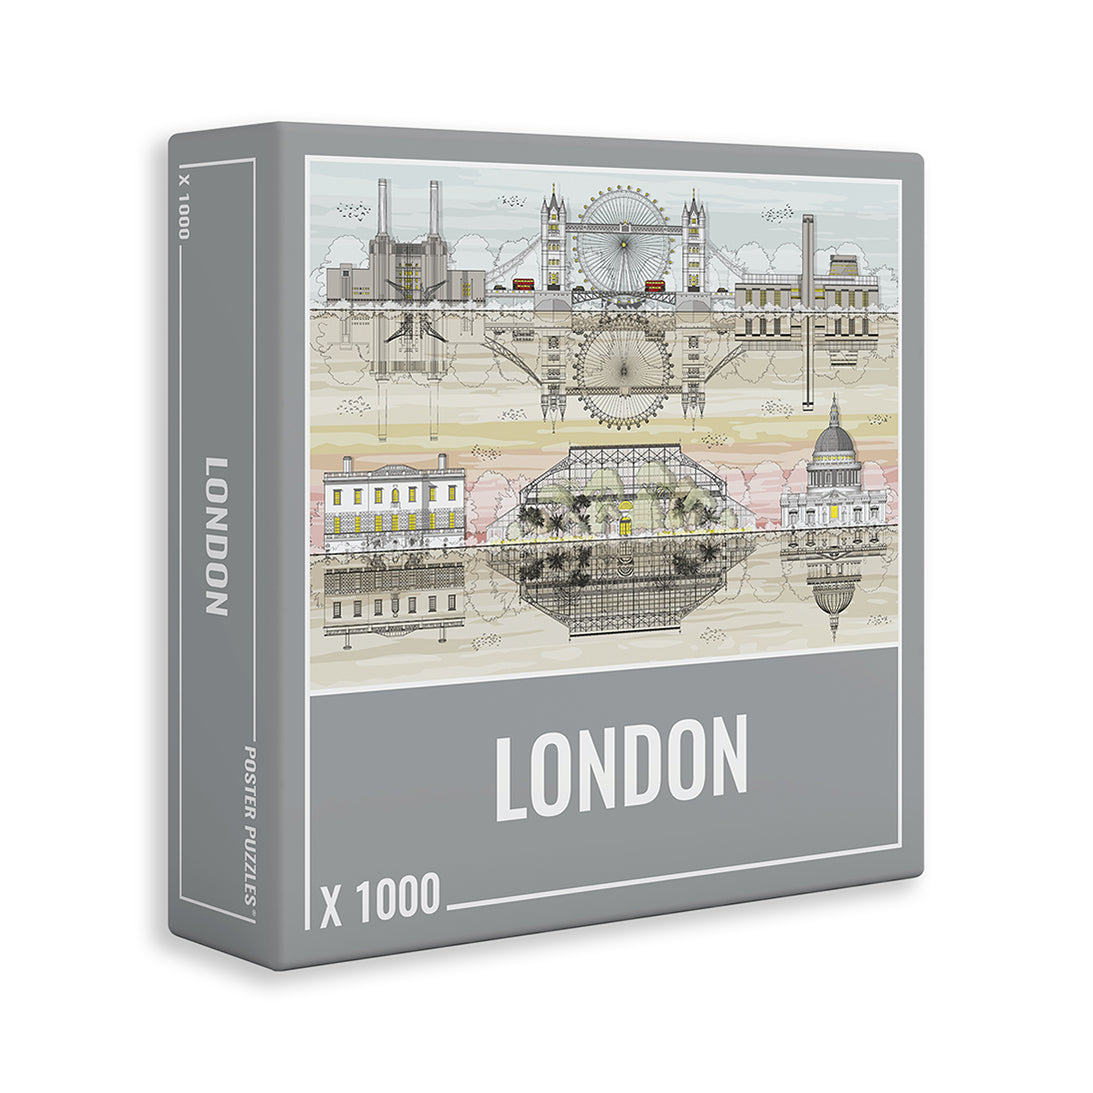 London | by Cloudberries | 1,000 Piece Jigsaw Puzzle